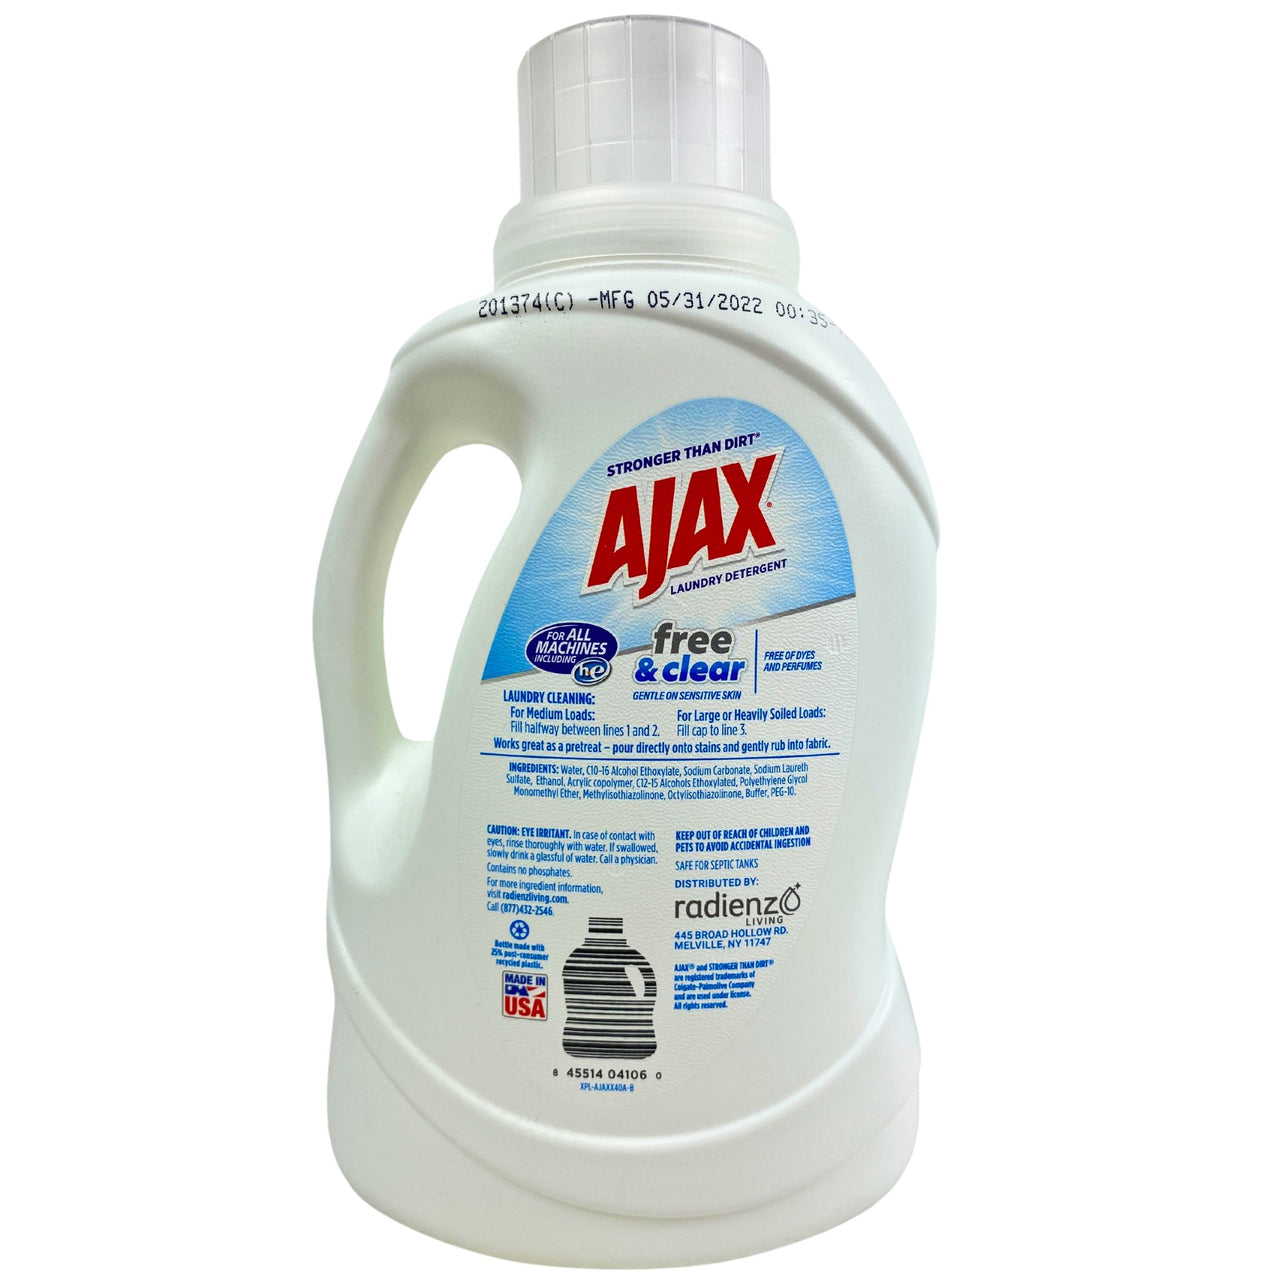 Ajax Free&Clear Unscented Laundry Detergent 